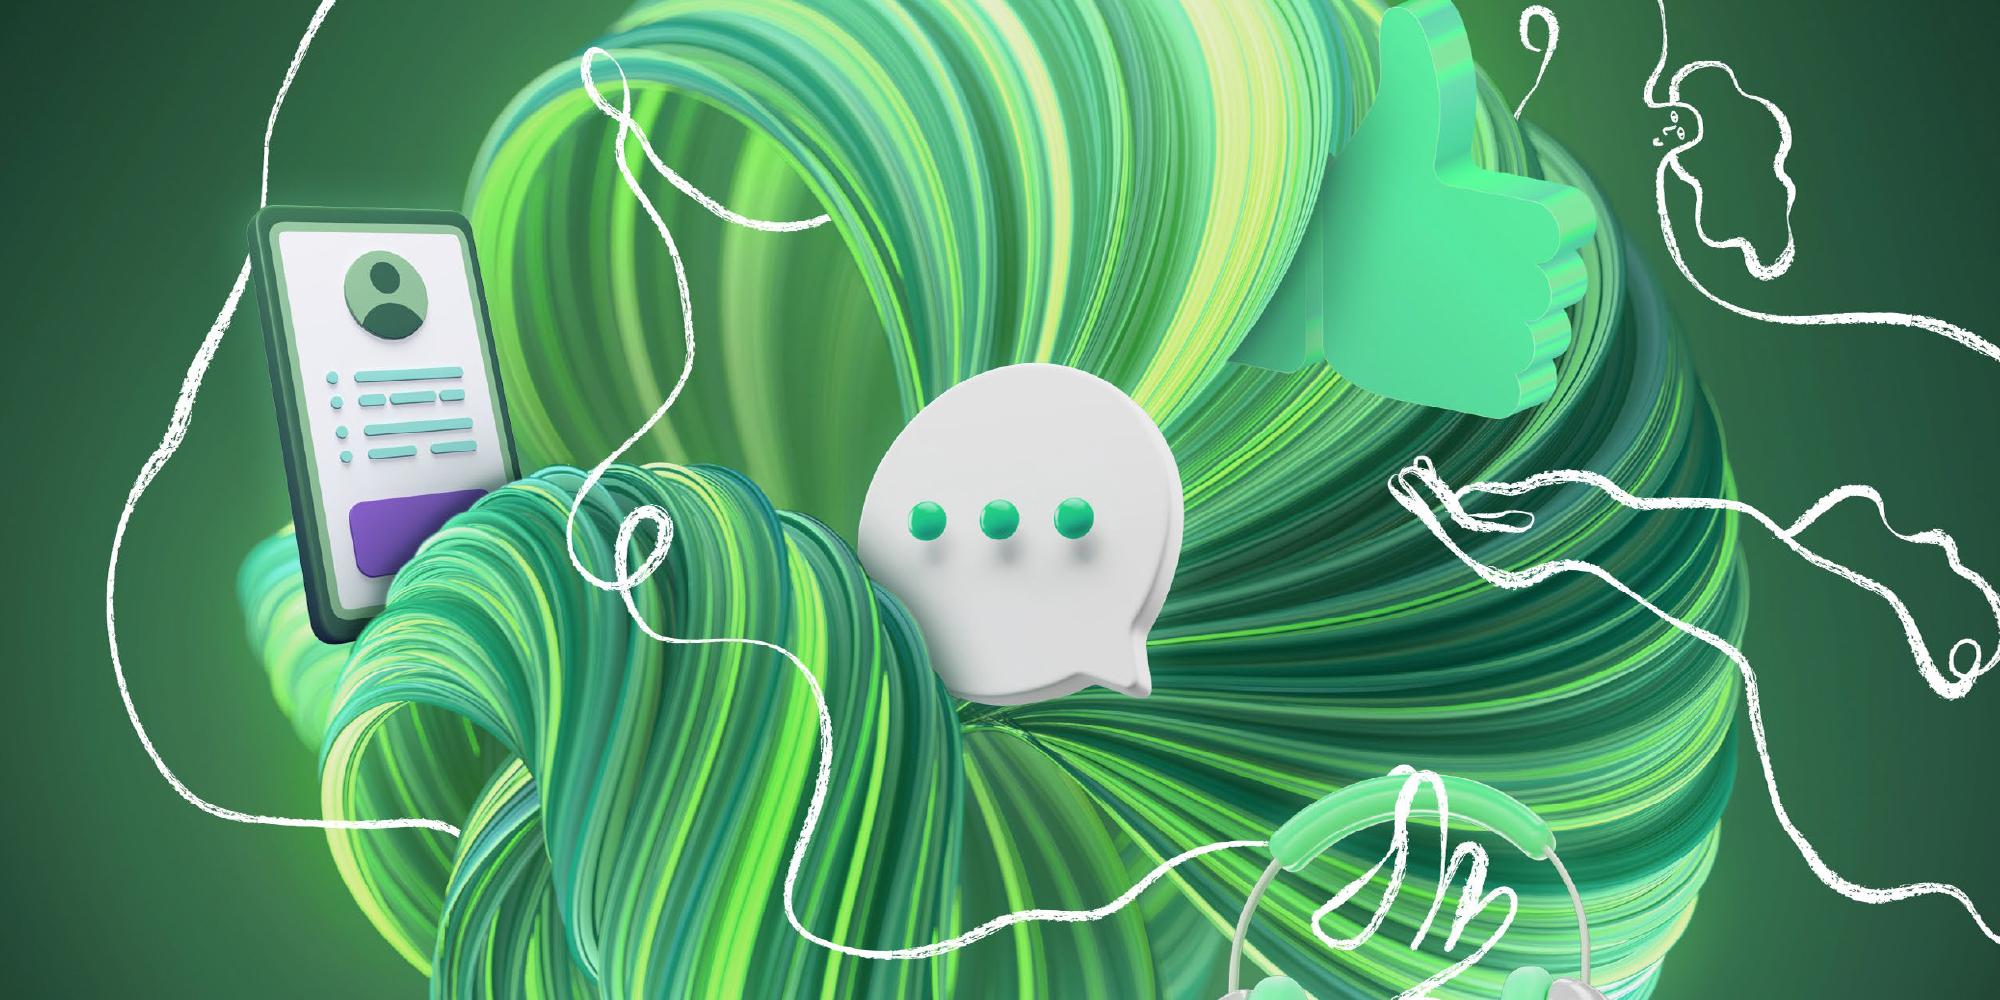 cellphone and text bubble in swirling green circle